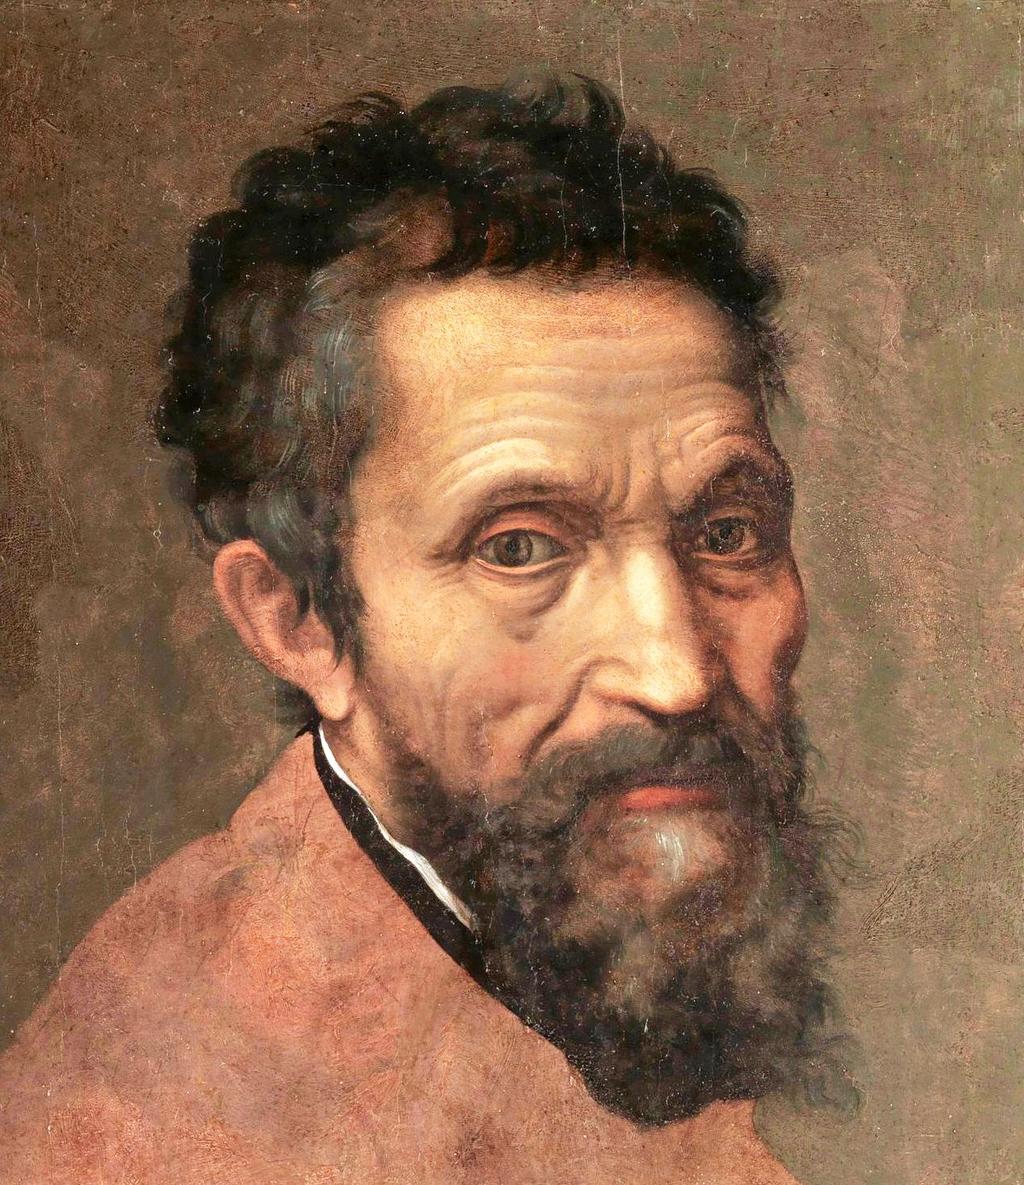 Michelangelo 1475-1564 Spent the majority of his life in either Florence or Rome Biggest patrons were Lorenzo de Medici and several popes such as Pope Julius